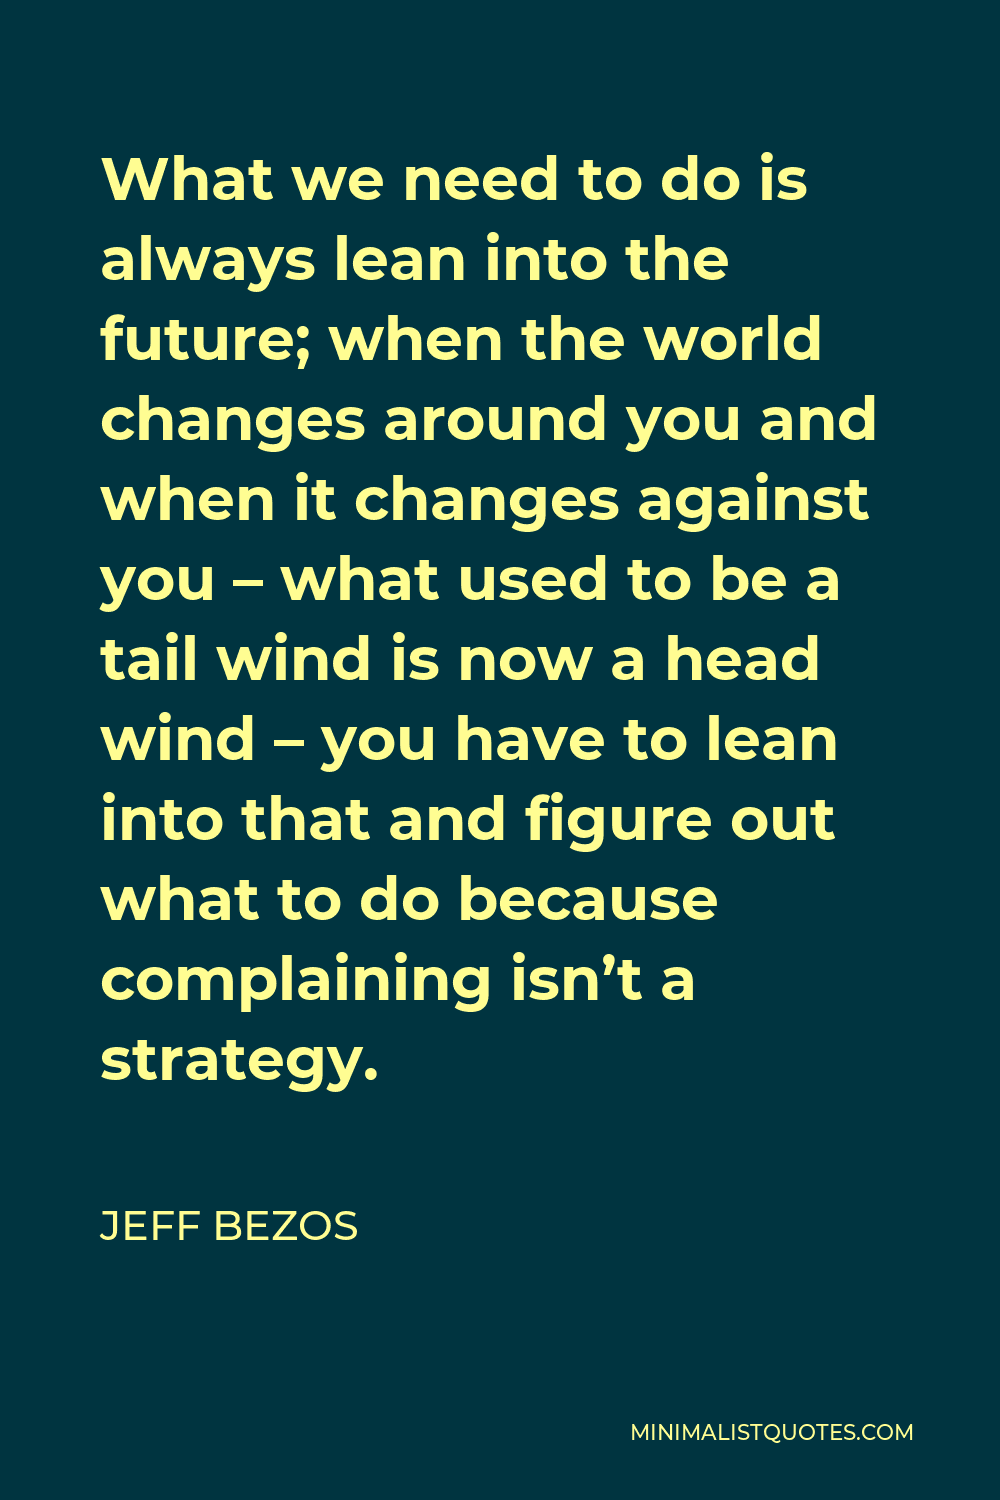 Jeff Bezos Quote - What we need to do is always lean into the future; when the world changes around you and when it changes against you – what used to be a tail wind is now a head wind – you have to lean into that and figure out what to do because complaining isn’t a strategy.